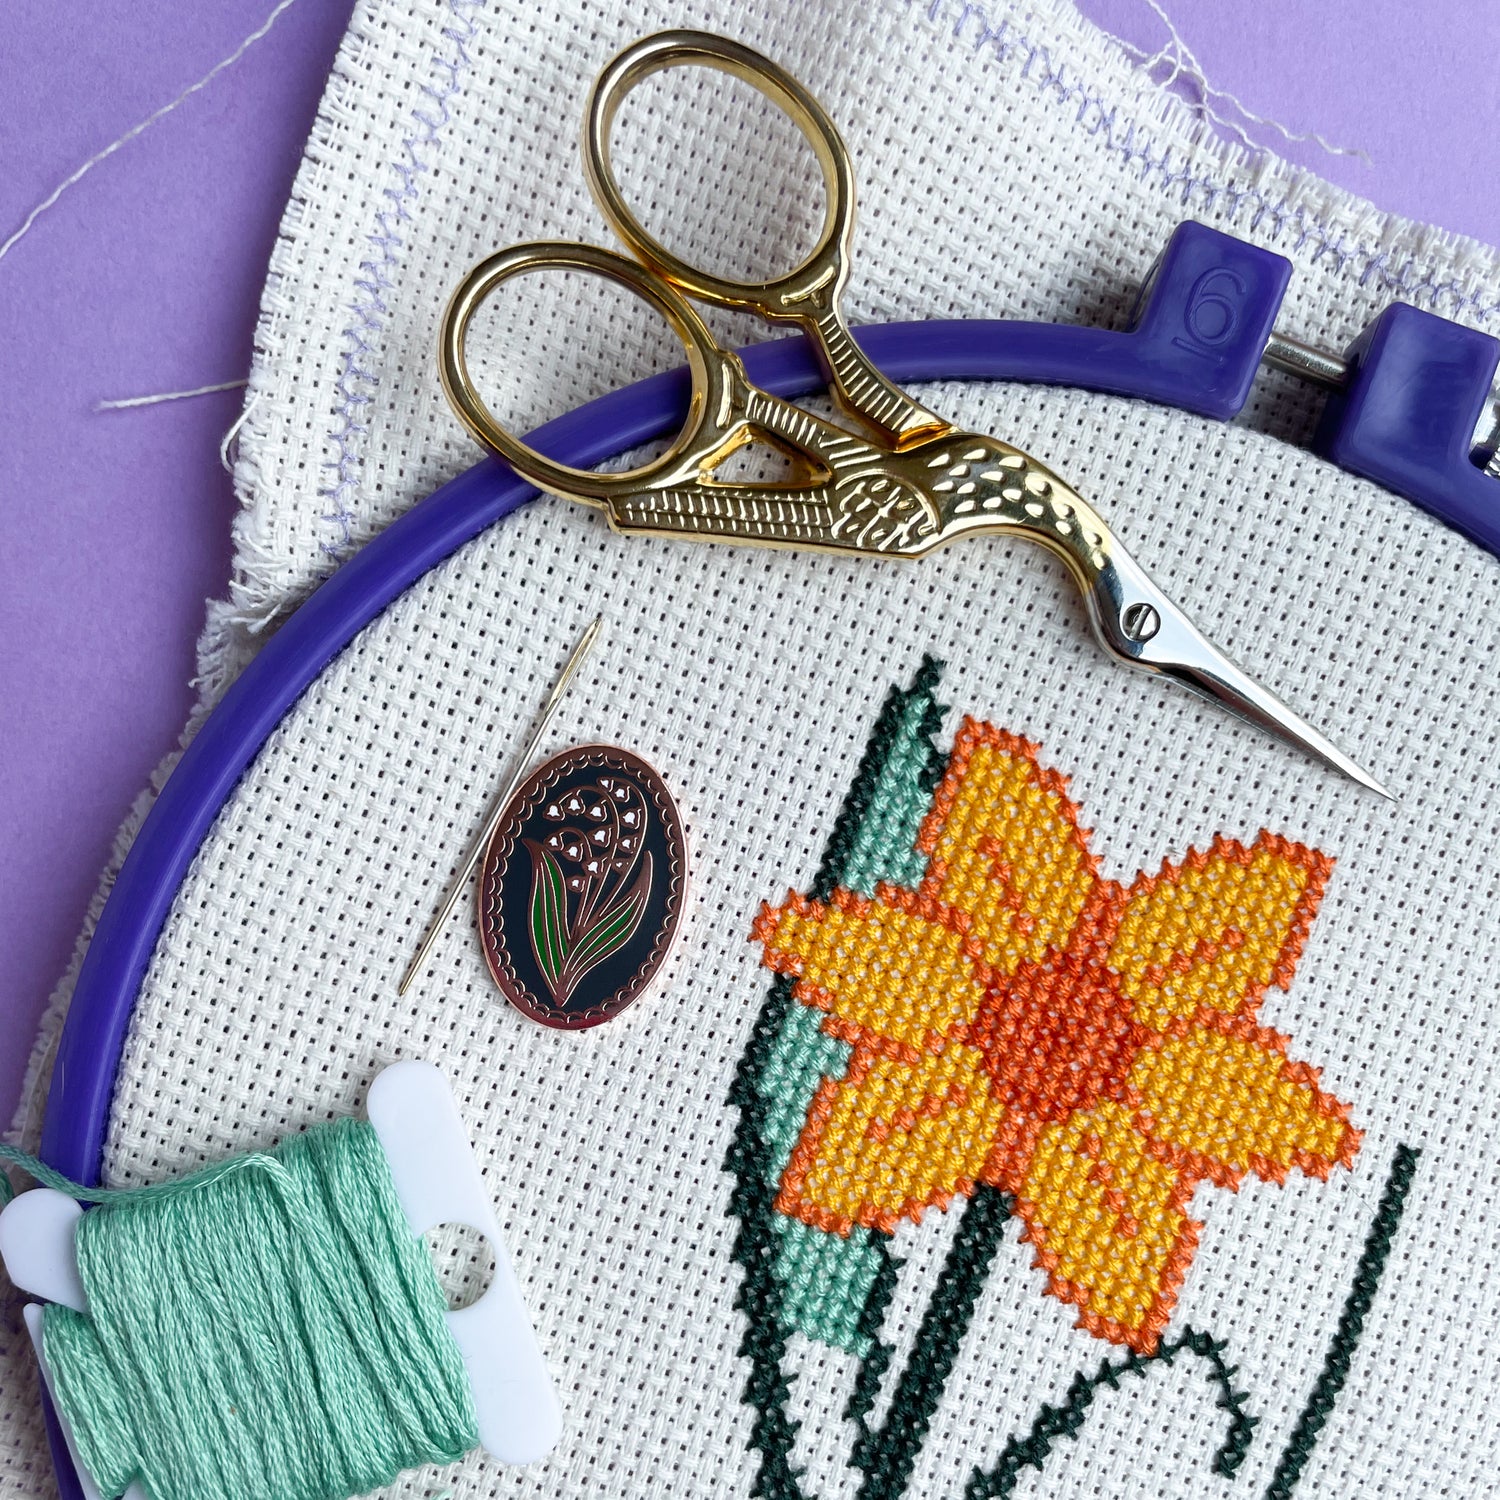 An embroidery hoop with a daffodil cross stitch on it with an oval needle minder, scissors and embroidery floss bobbin. 